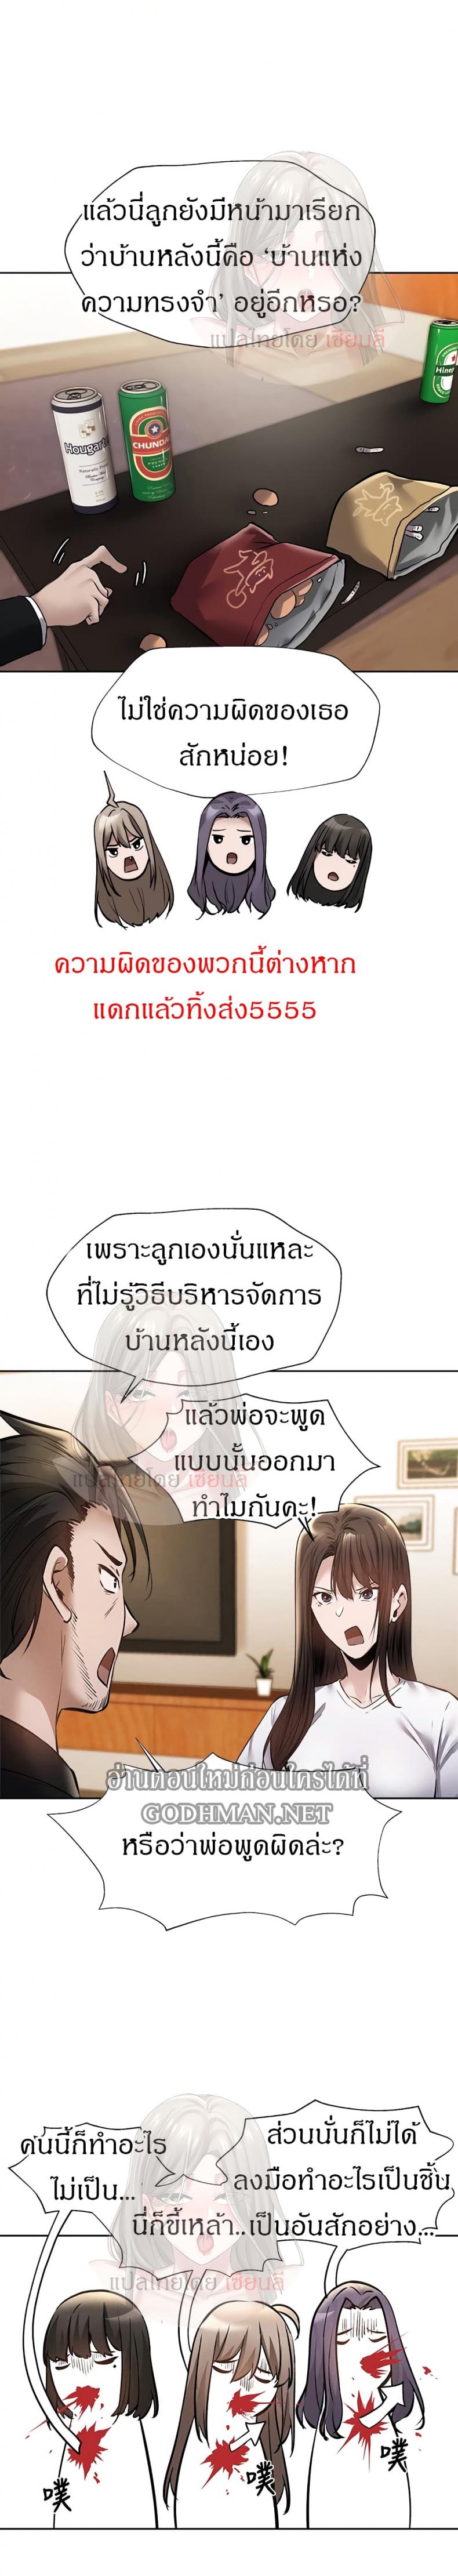 Is There an Empty Room? 61 ภาพที่ 14